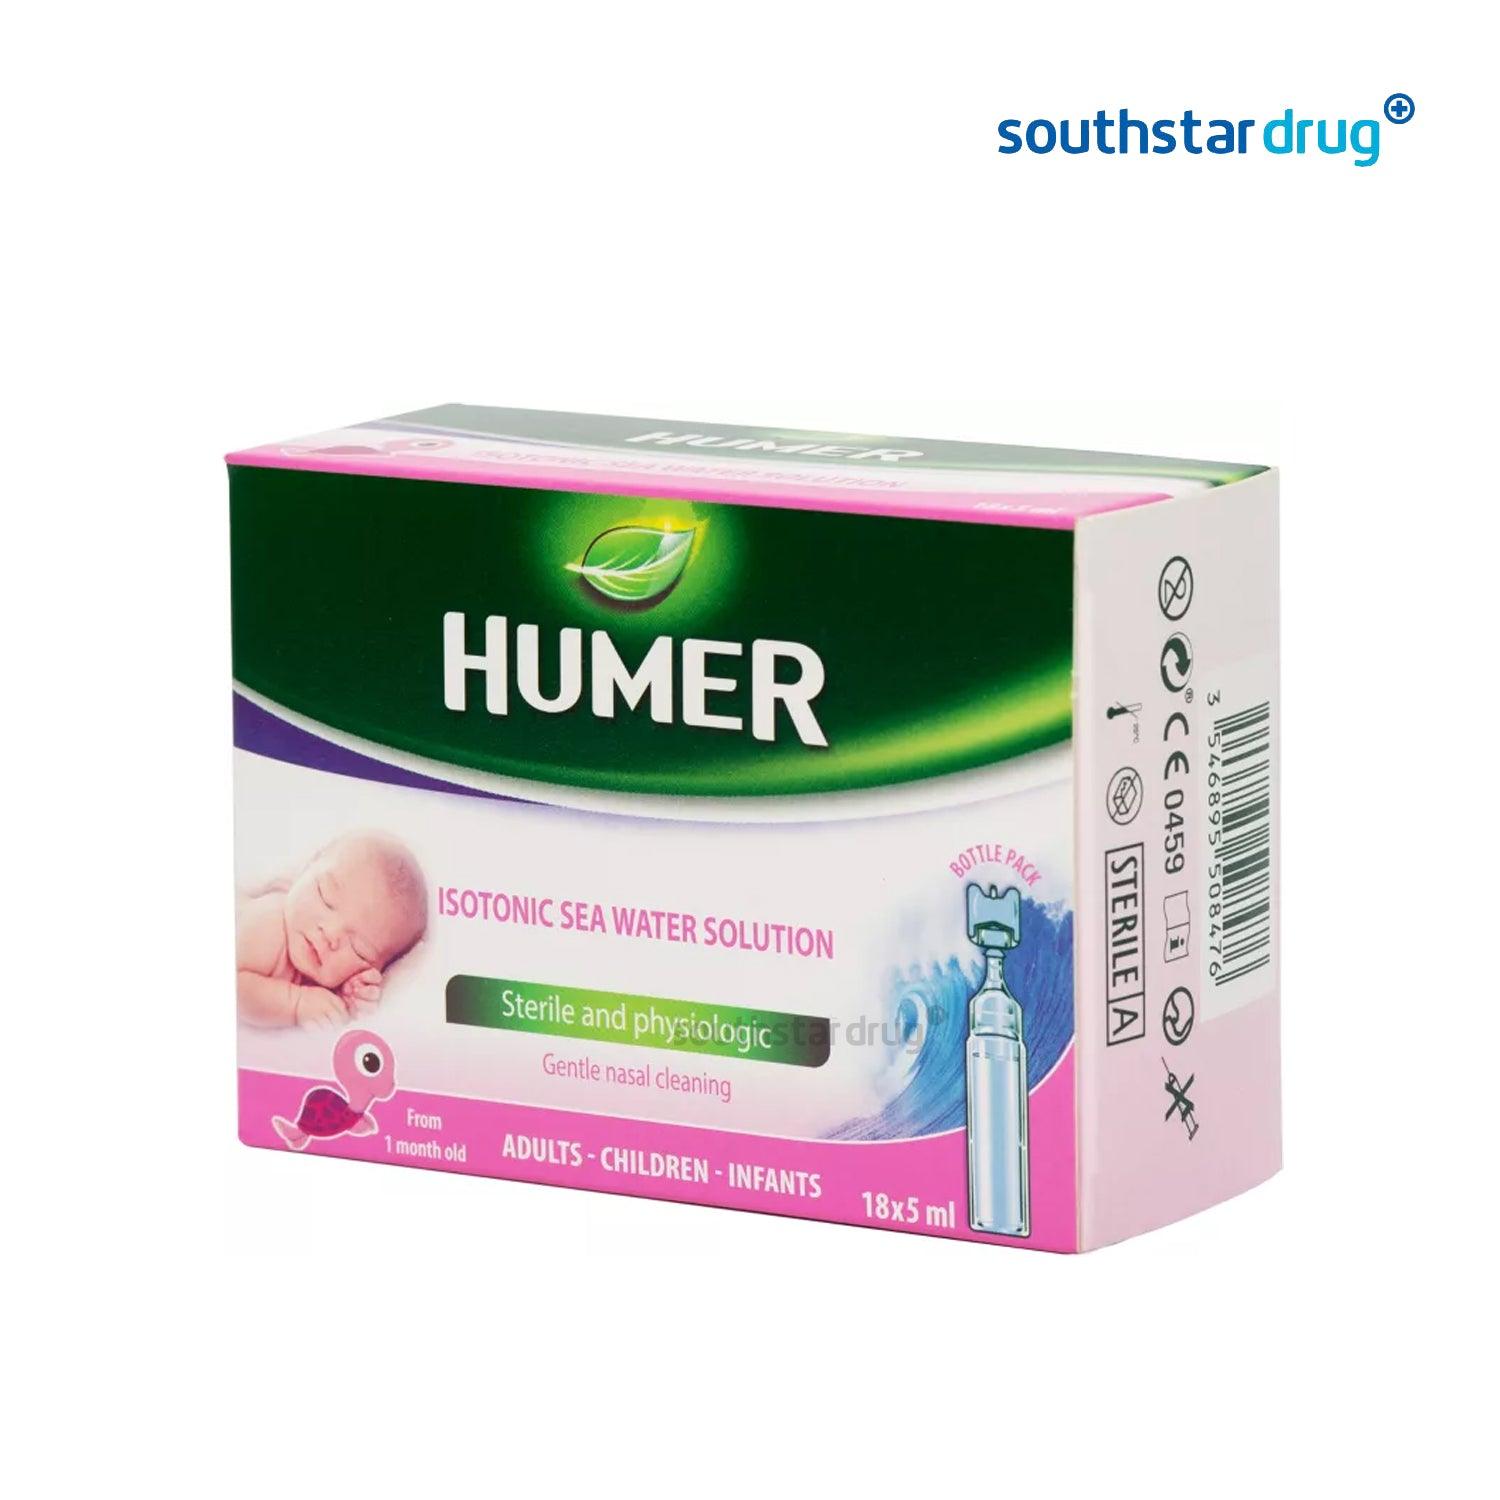 Humer PH Learn More About Our Humer Nasal Solution Facebook, 47% OFF